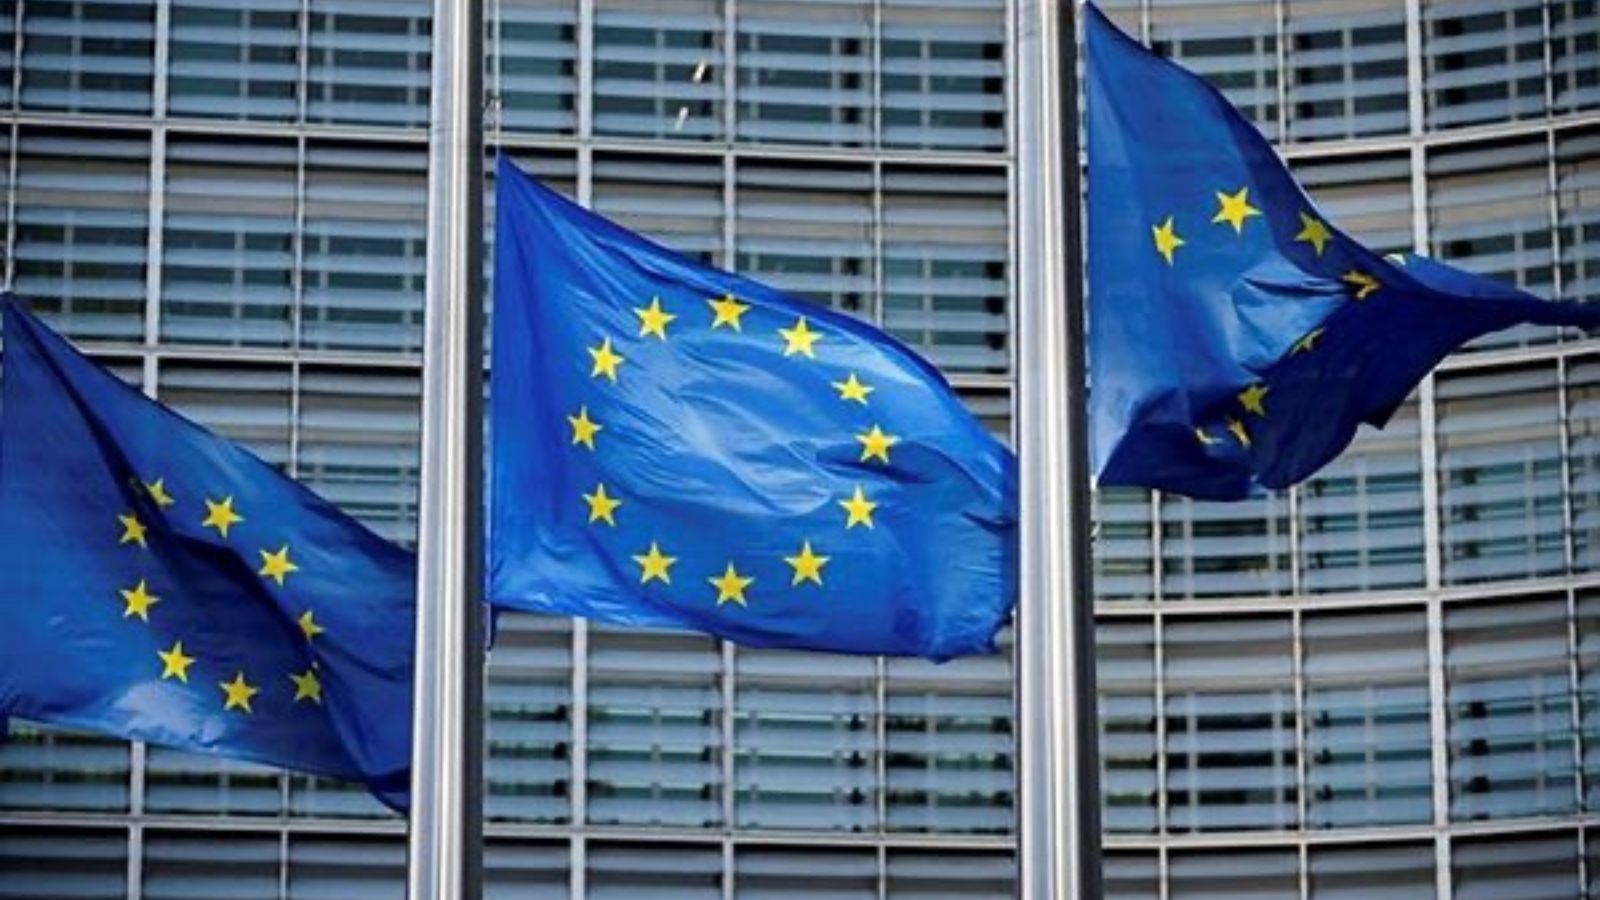 EU adds 19 Russians, Russian federal penitentiary to sanctions list | World News – The Indian Express